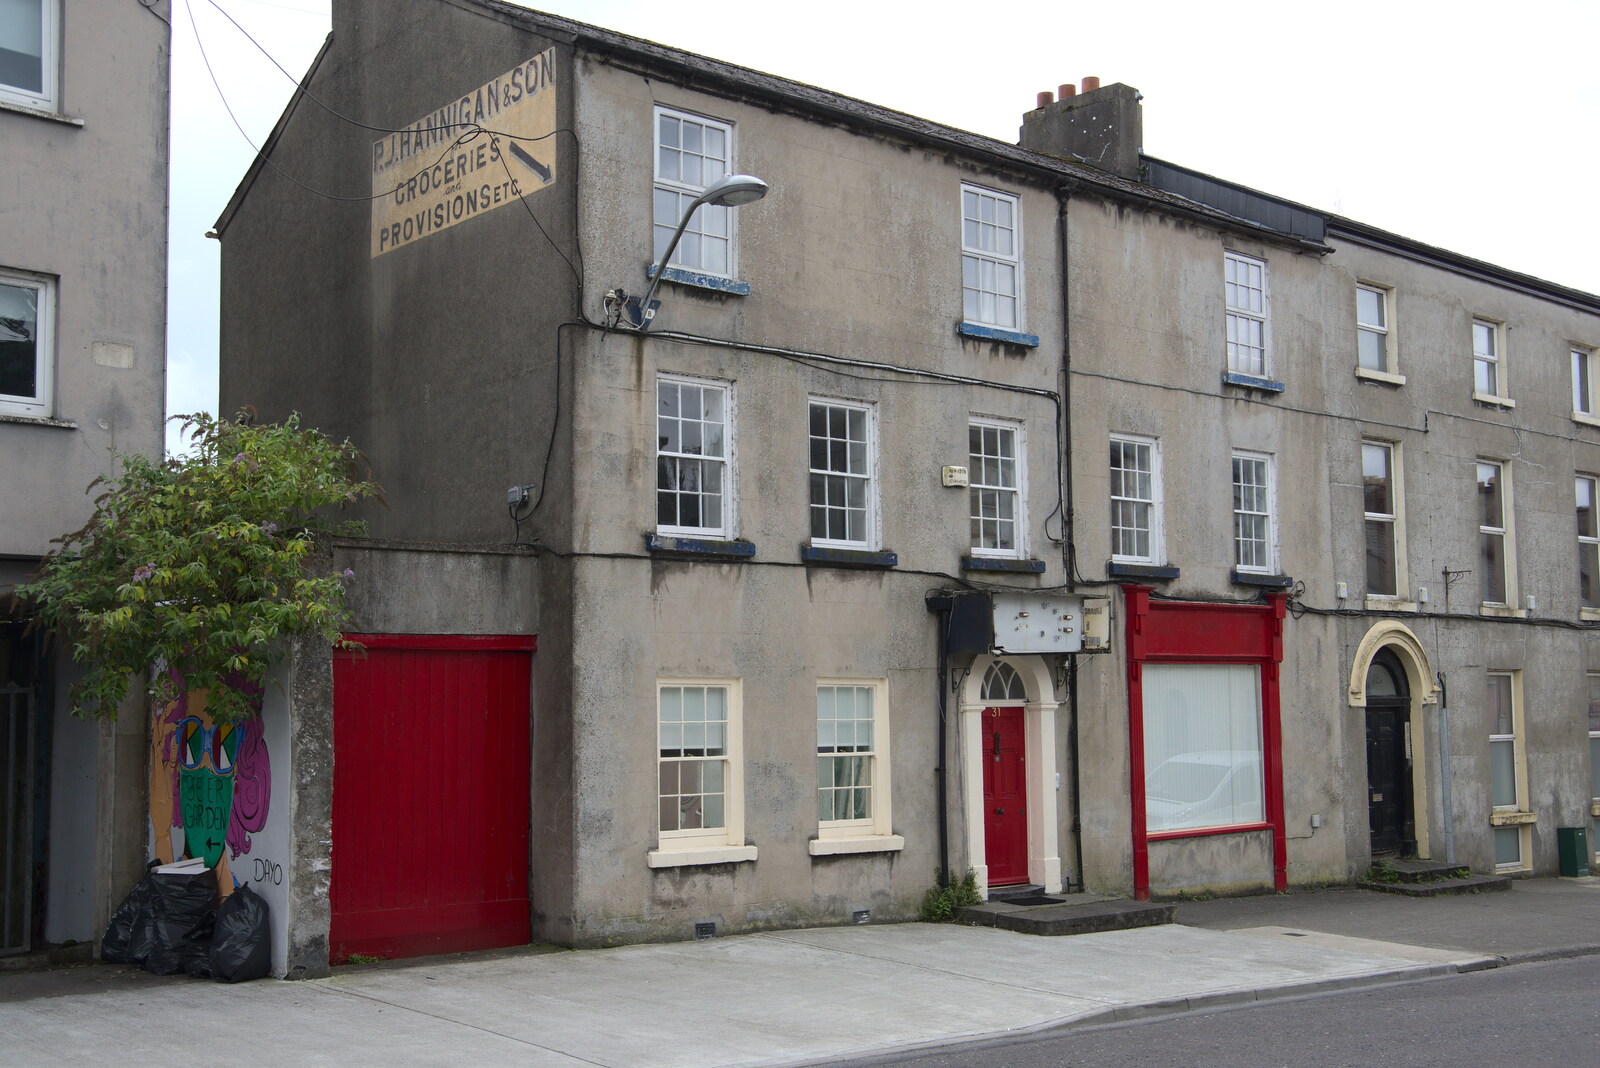 A Trip to Manorhamilton, County Leitrim, Ireland - 11th August 2021: The old PJ Hannigan grocers on The Mall